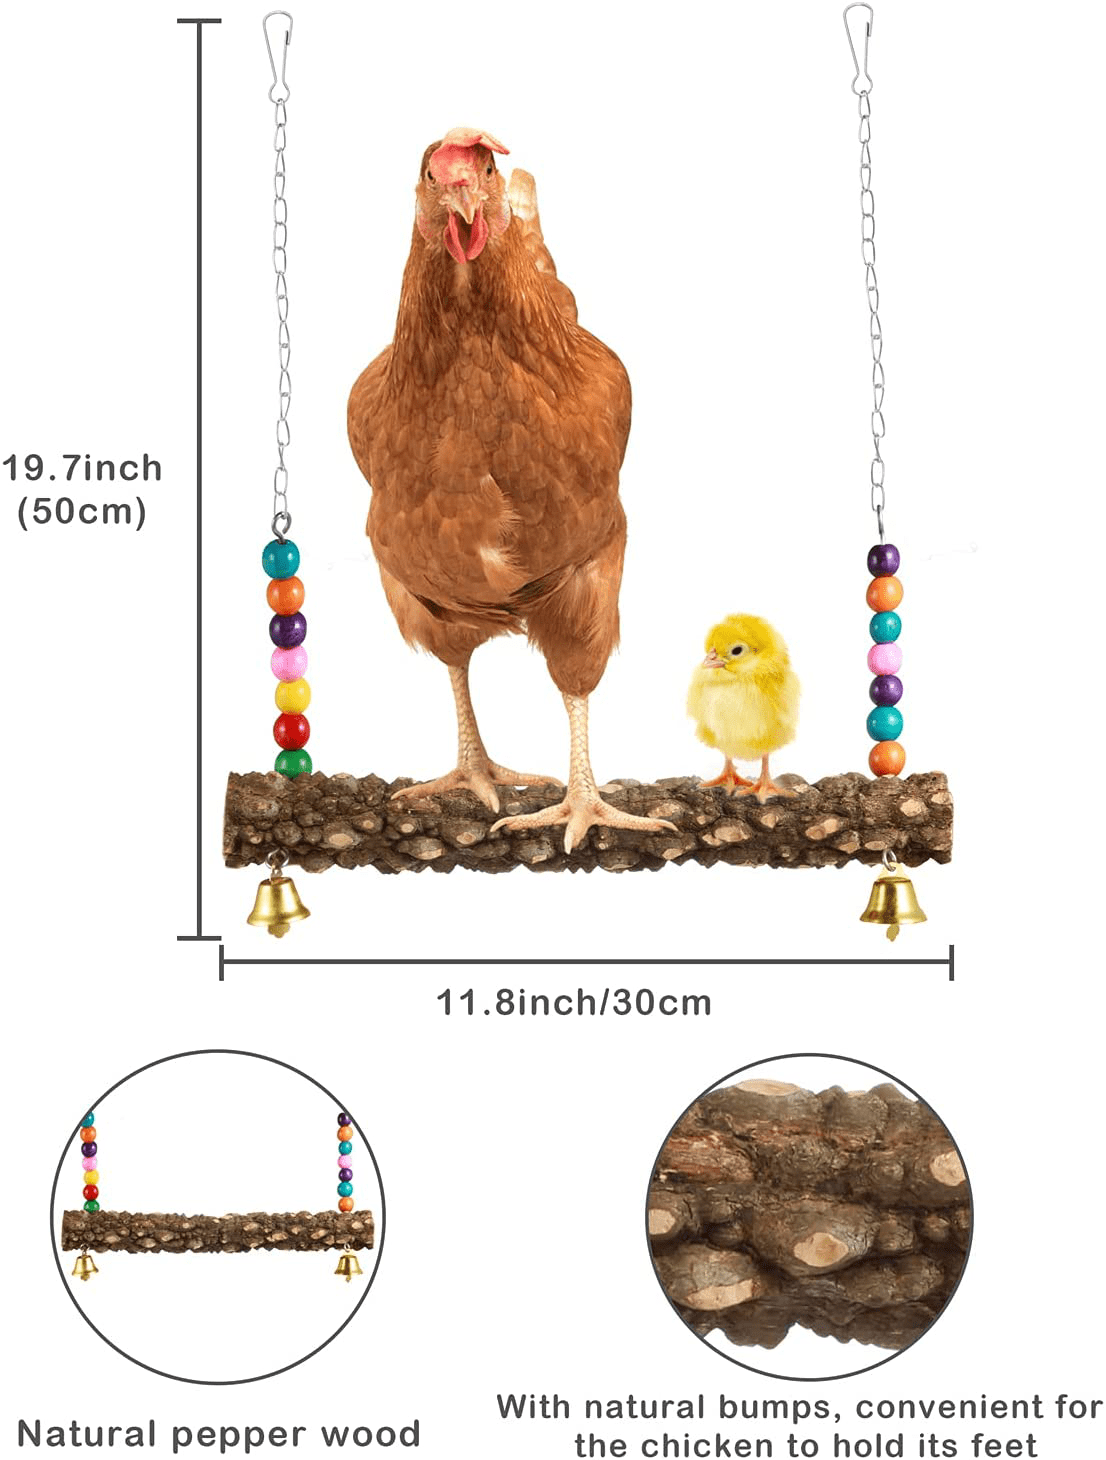 Woiworco 4 Packs Chicken Toys for Coop, Chicken Xylophone Toys with Mirror, Vegetable Hanging Feeder and Chicken Swing Toys for Chicken Hens